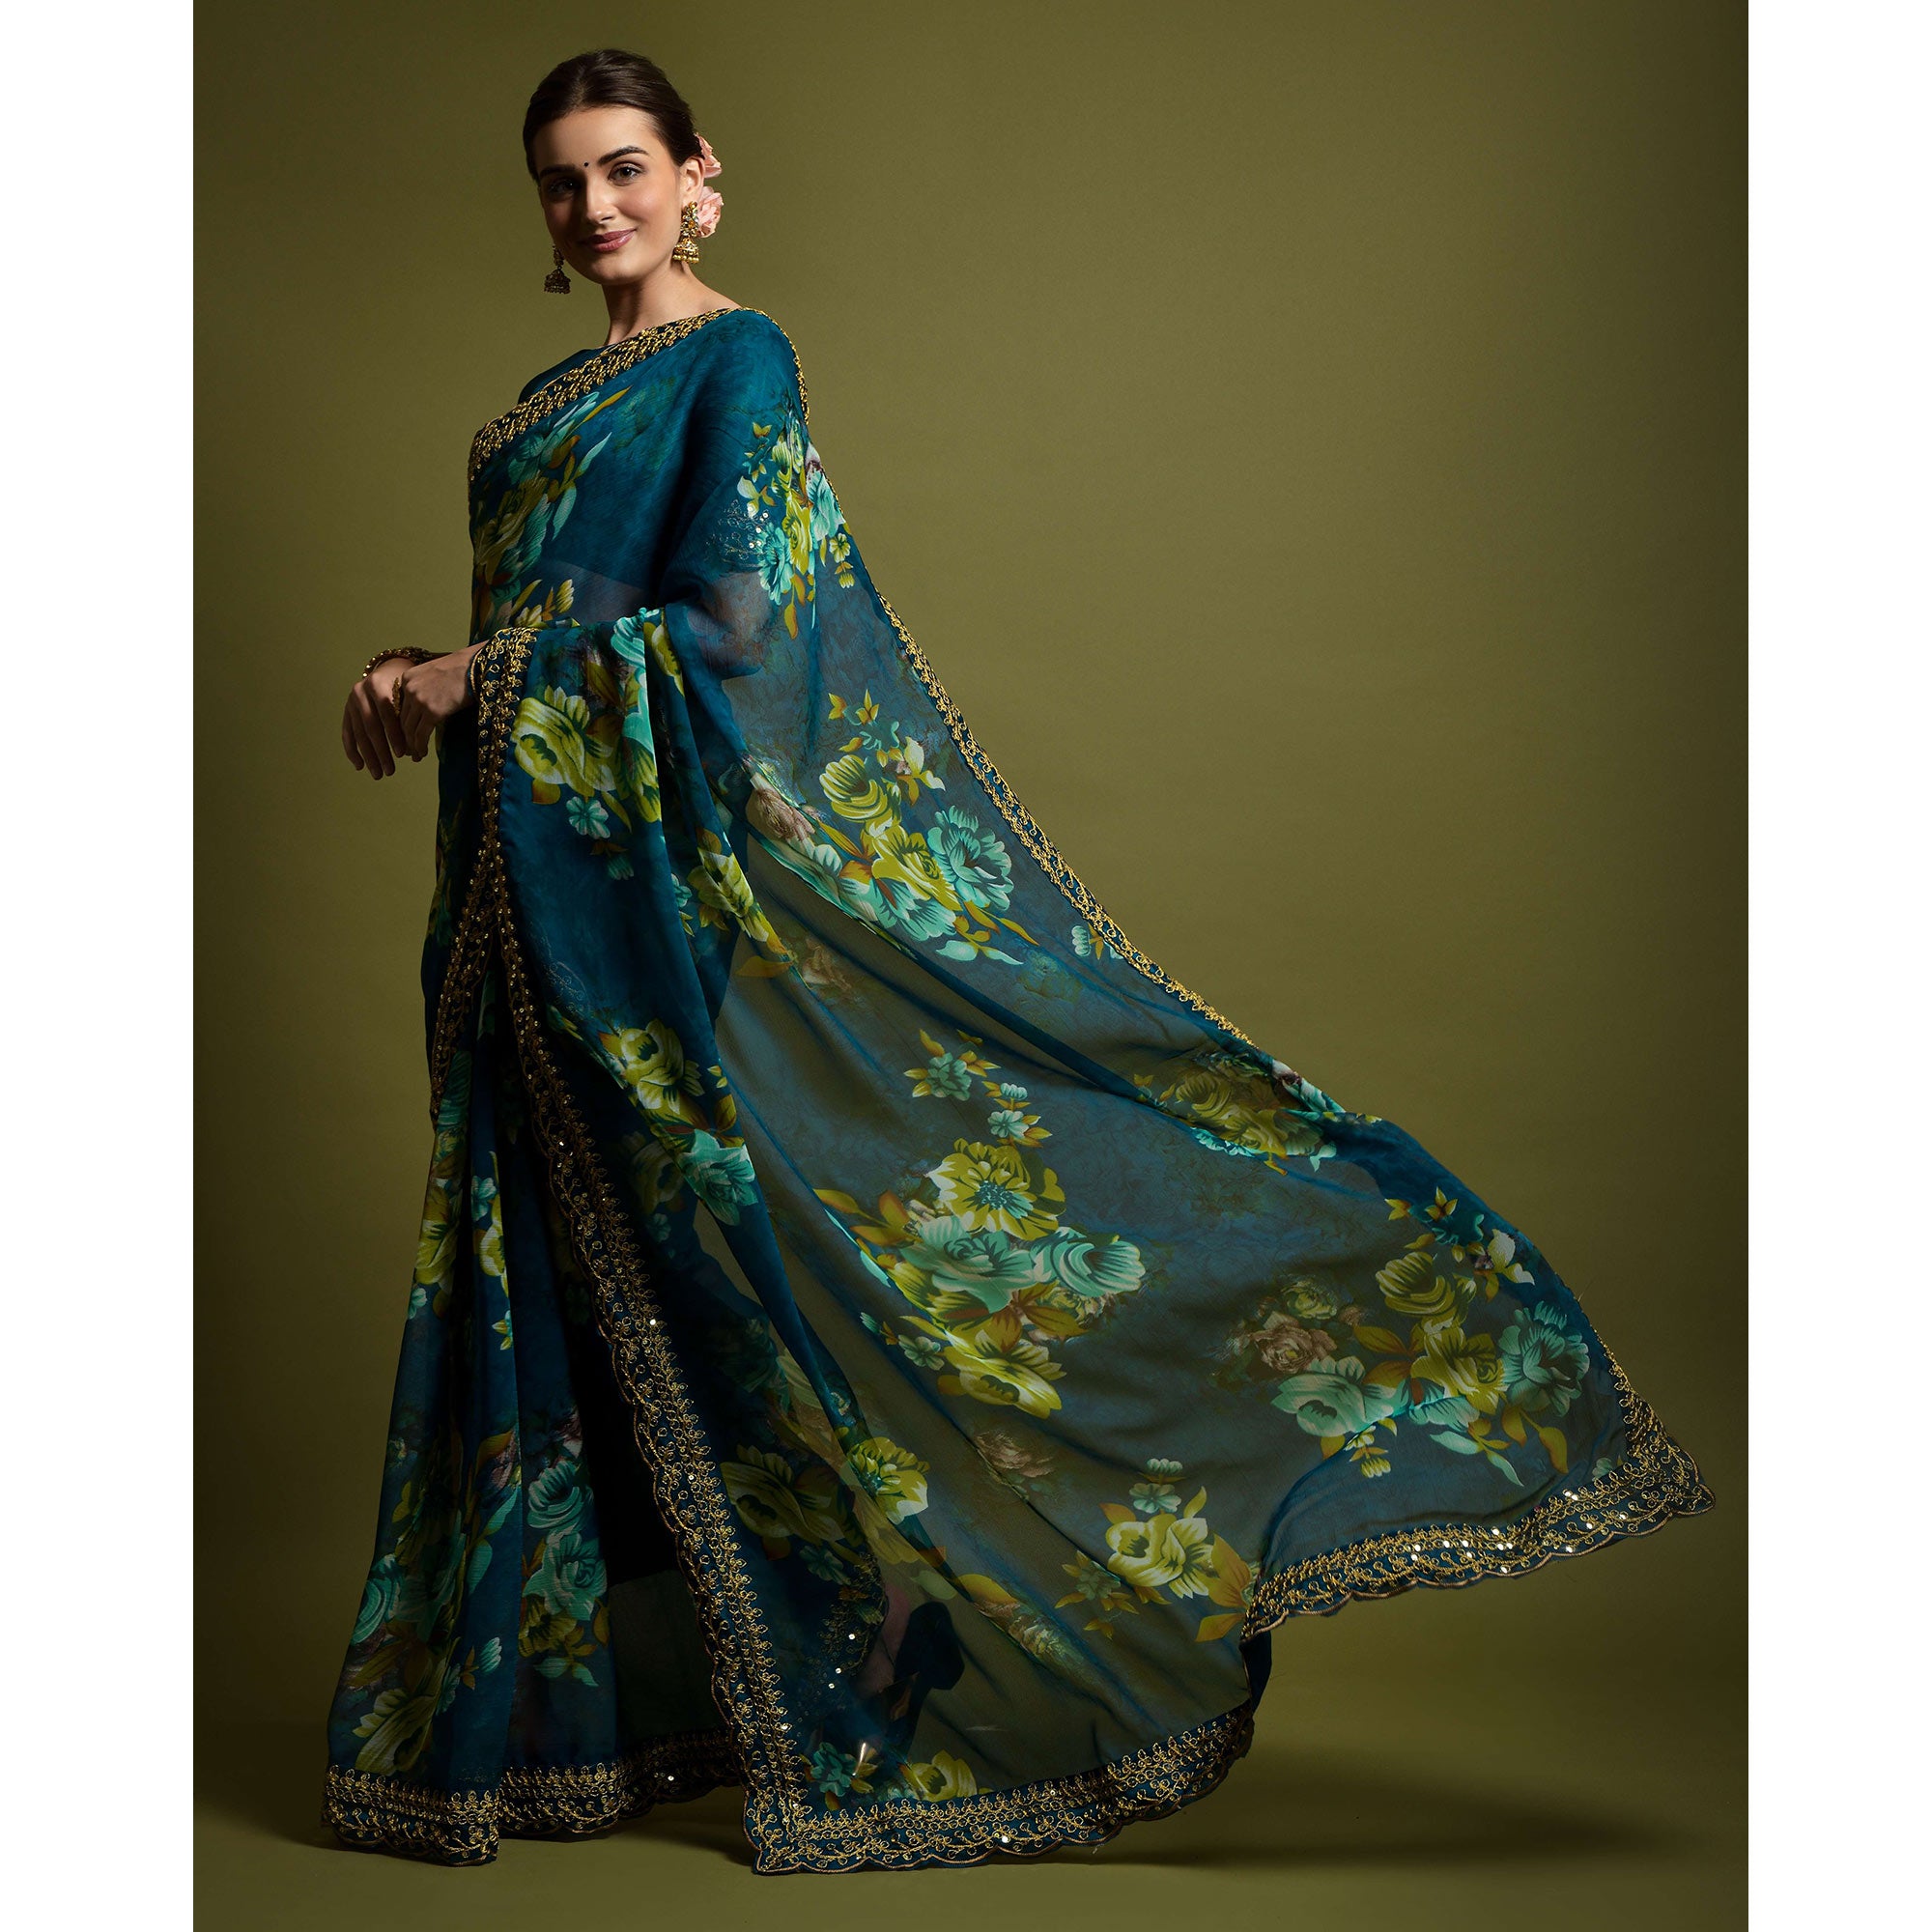 Teal Floral Printed Georgette Saree With Embroidered Border